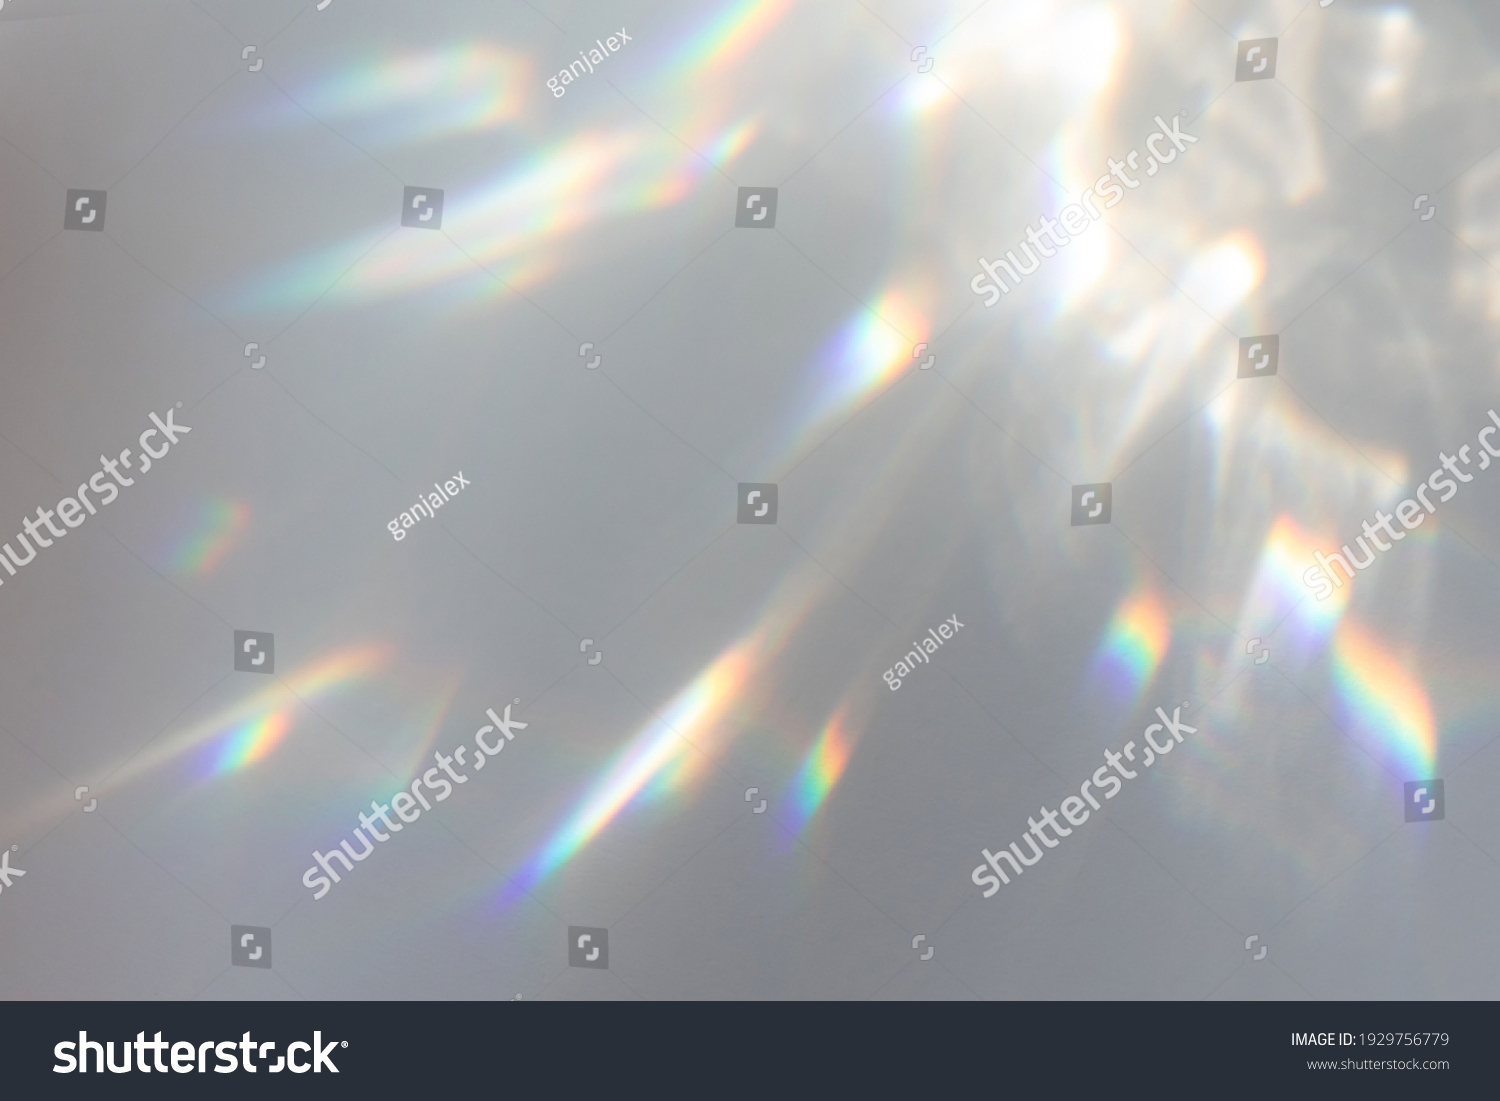 Blurred rainbow light refraction texture overlay effect for photo and mockups. Organic drop diagonal holographic flare on a white wall. Shadows for natural light effects #1929756779